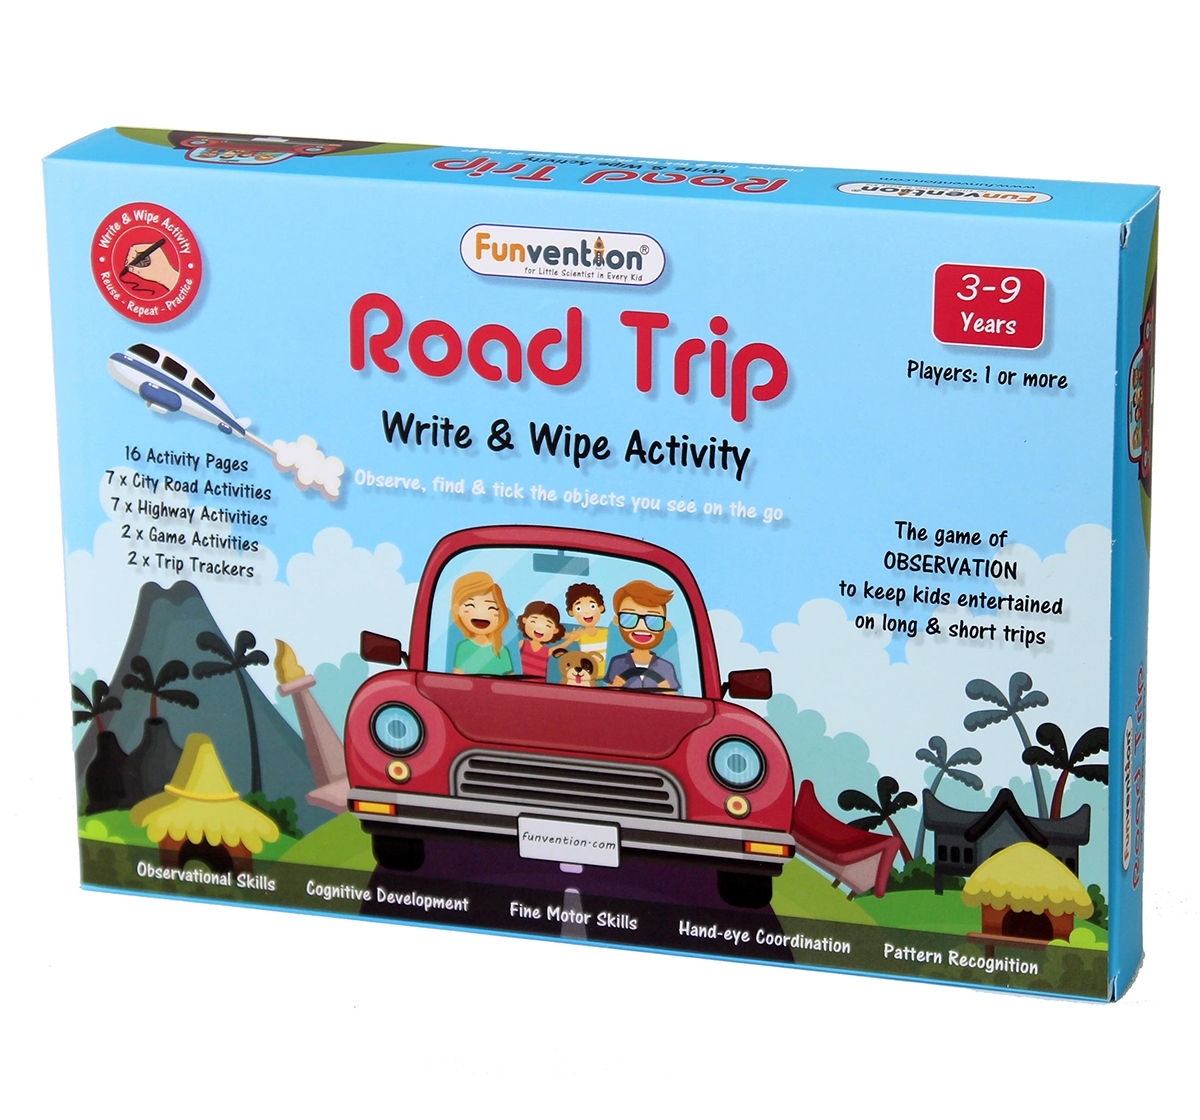 Funvention Write & Wipe Activity - Road Trip Science Kits for Kids Age 3Y+